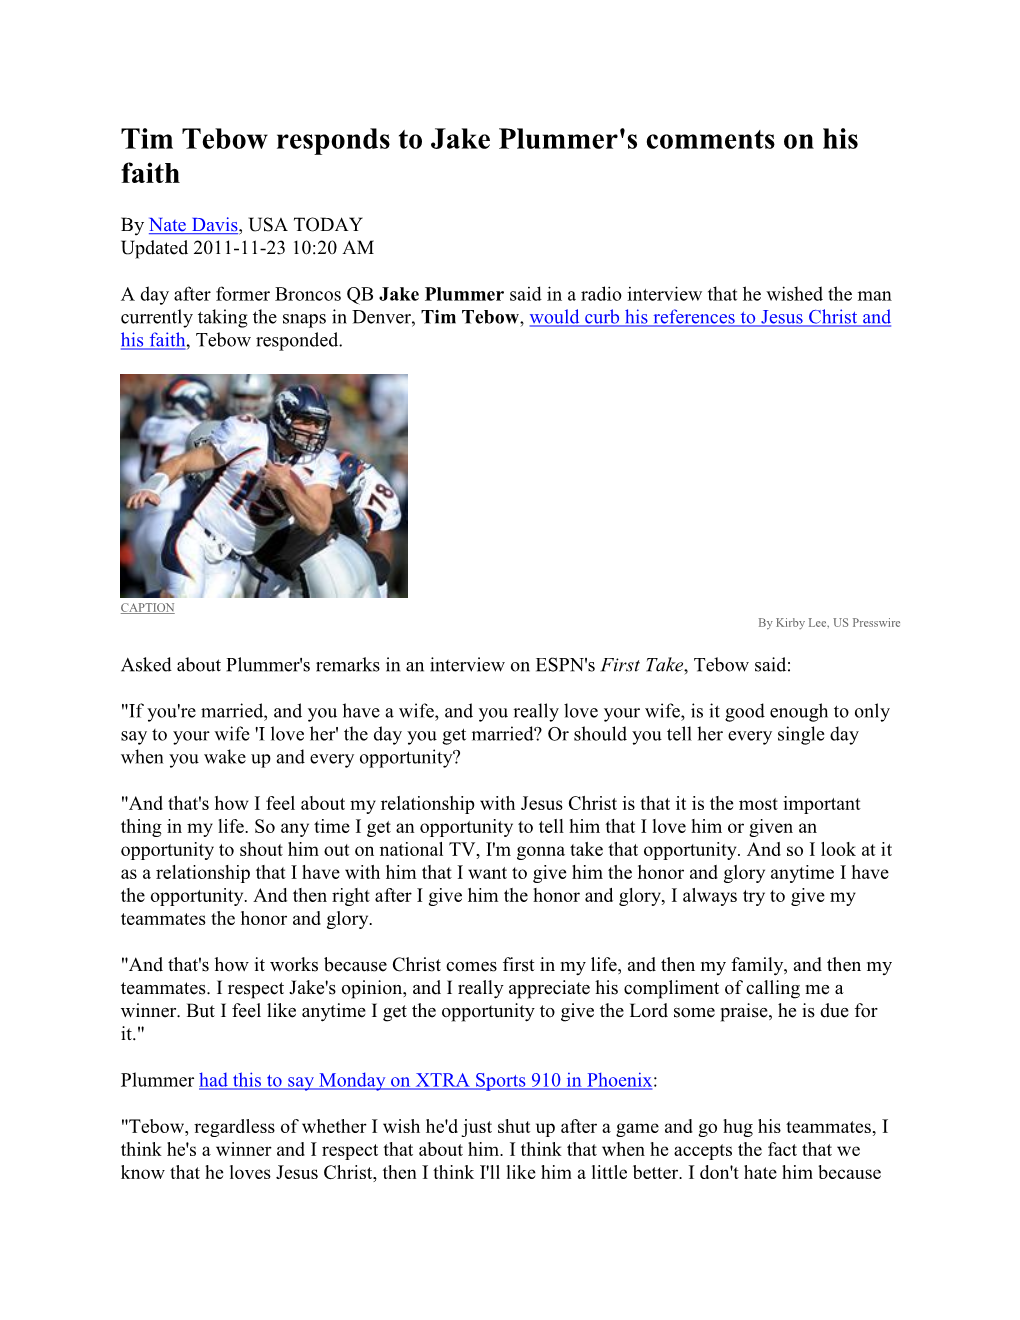 Tim Tebow Responds to Jake Plummer's Comments on His Faith